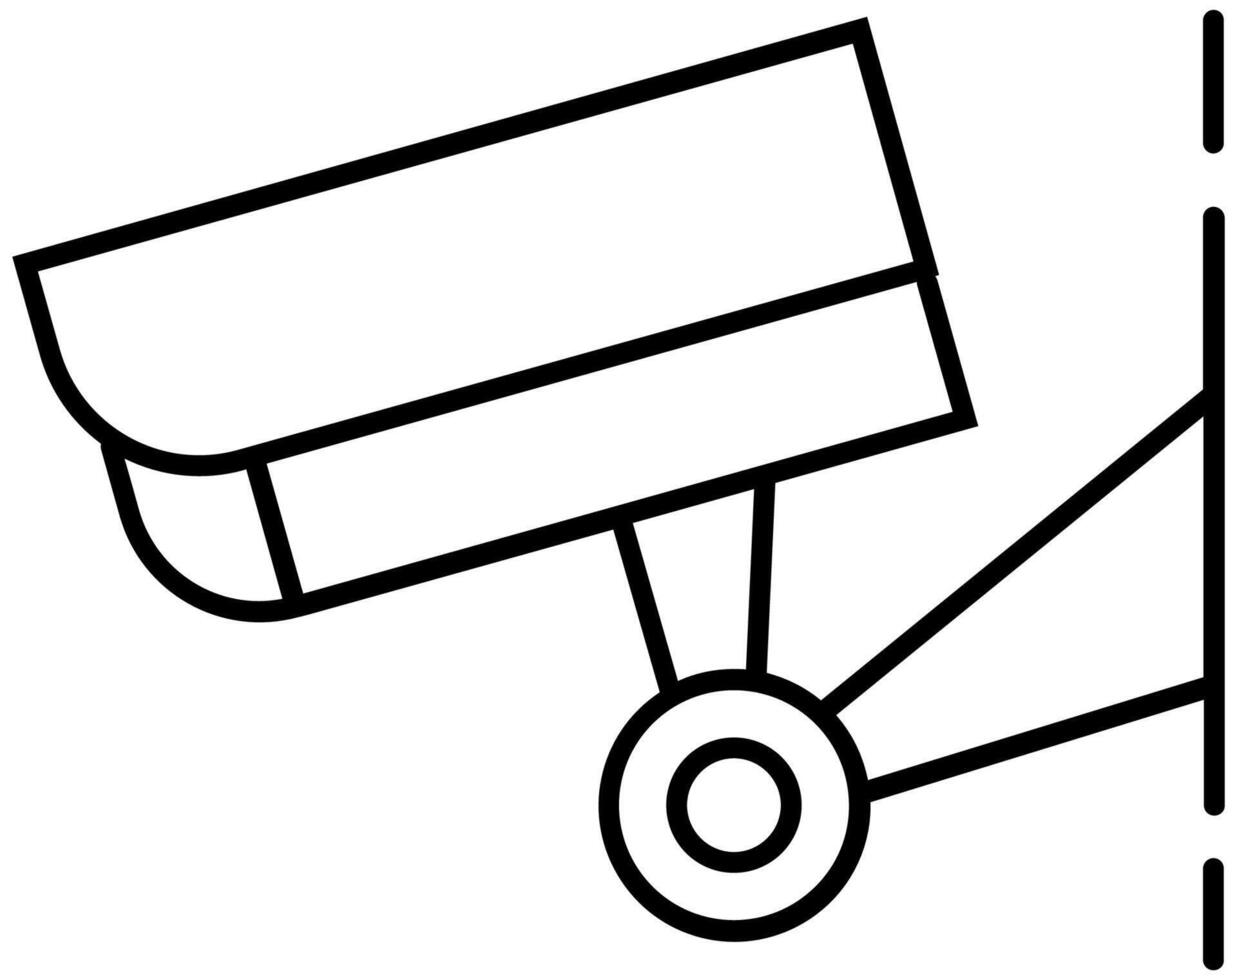 CCTV icon in thin outline. vector